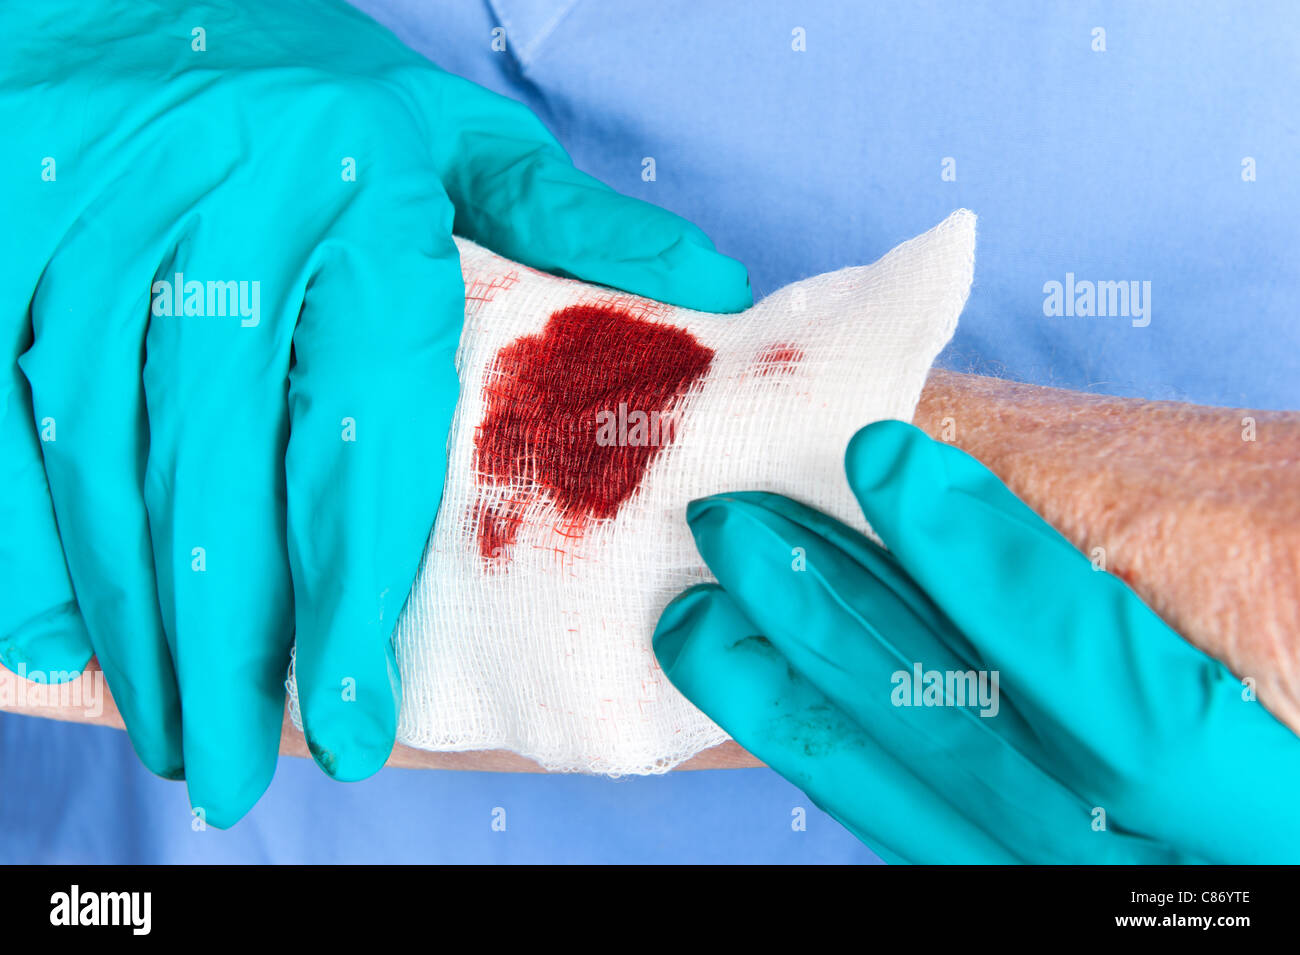 A nurse tends to a bloody wound on an elderly woman's arm Stock Photo